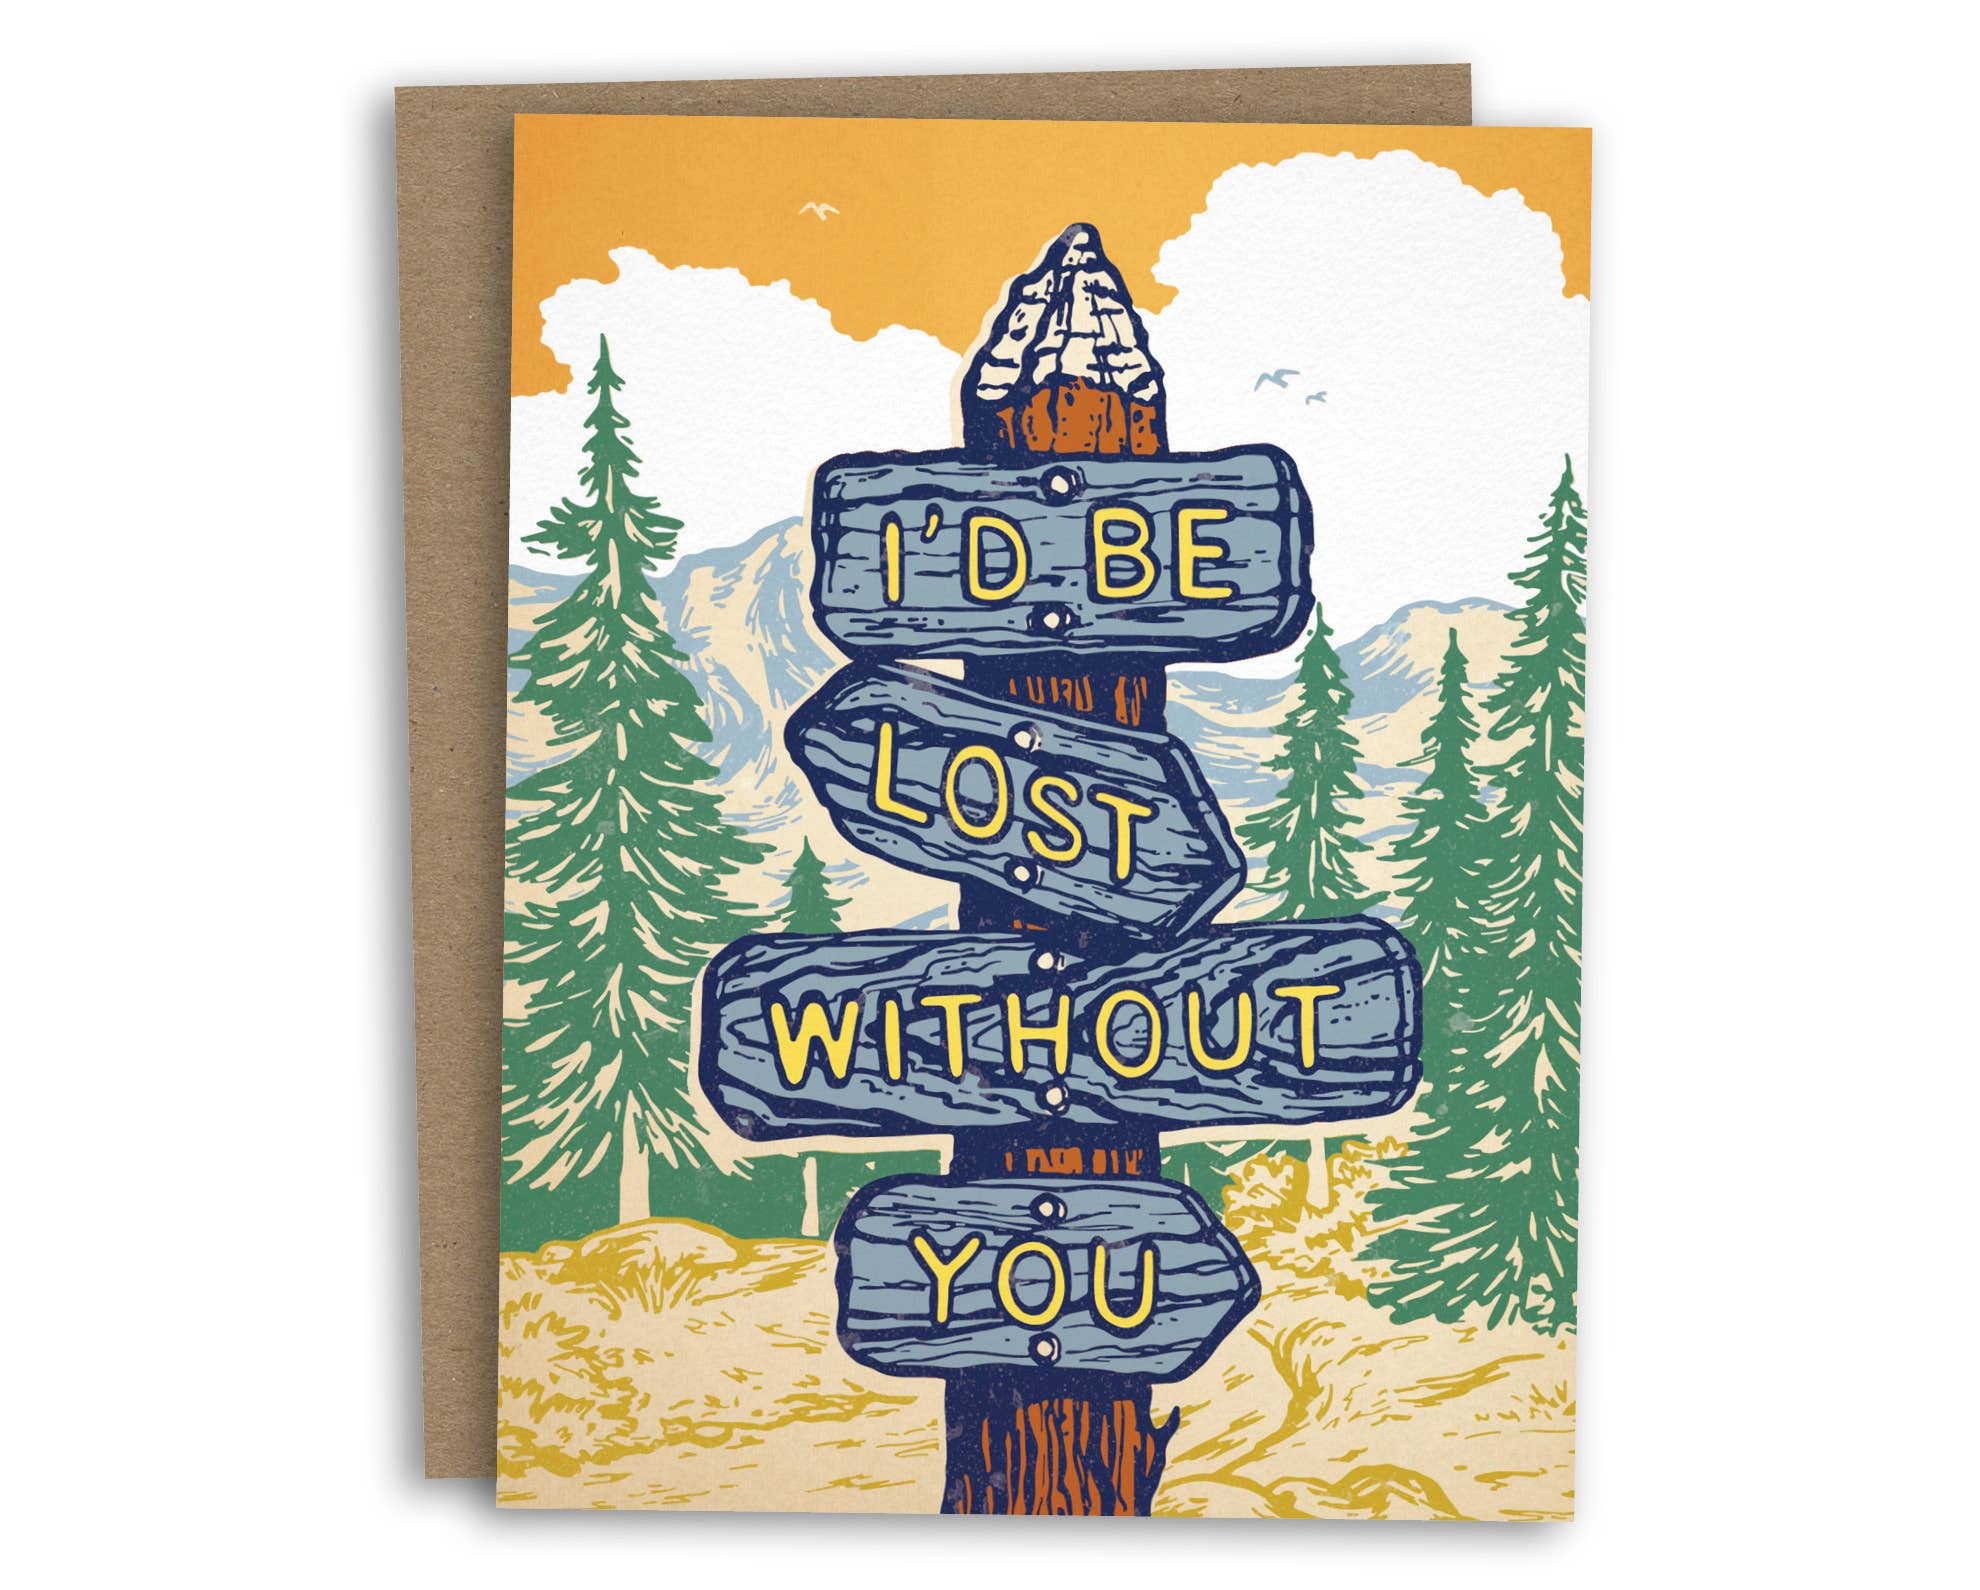 Alpinecho - I'd Be Lost Without You Greeting Card